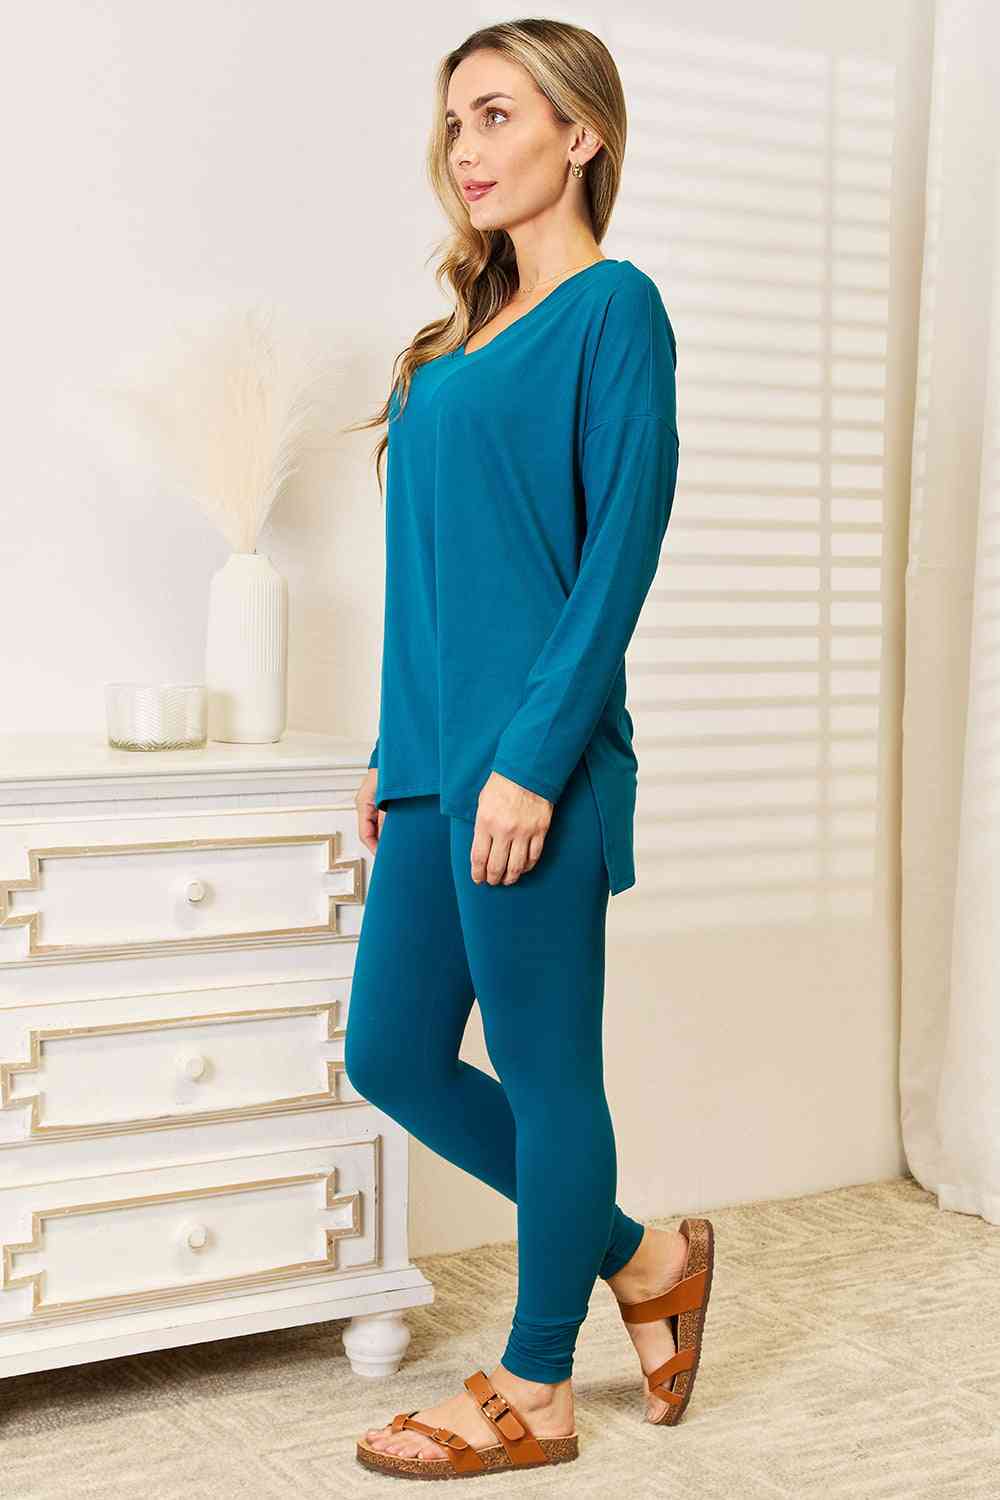 Lazy Days Full Size Long Sleeve Top and Leggings Set - Camis & Tops - Outfit Sets - 7 - 2024